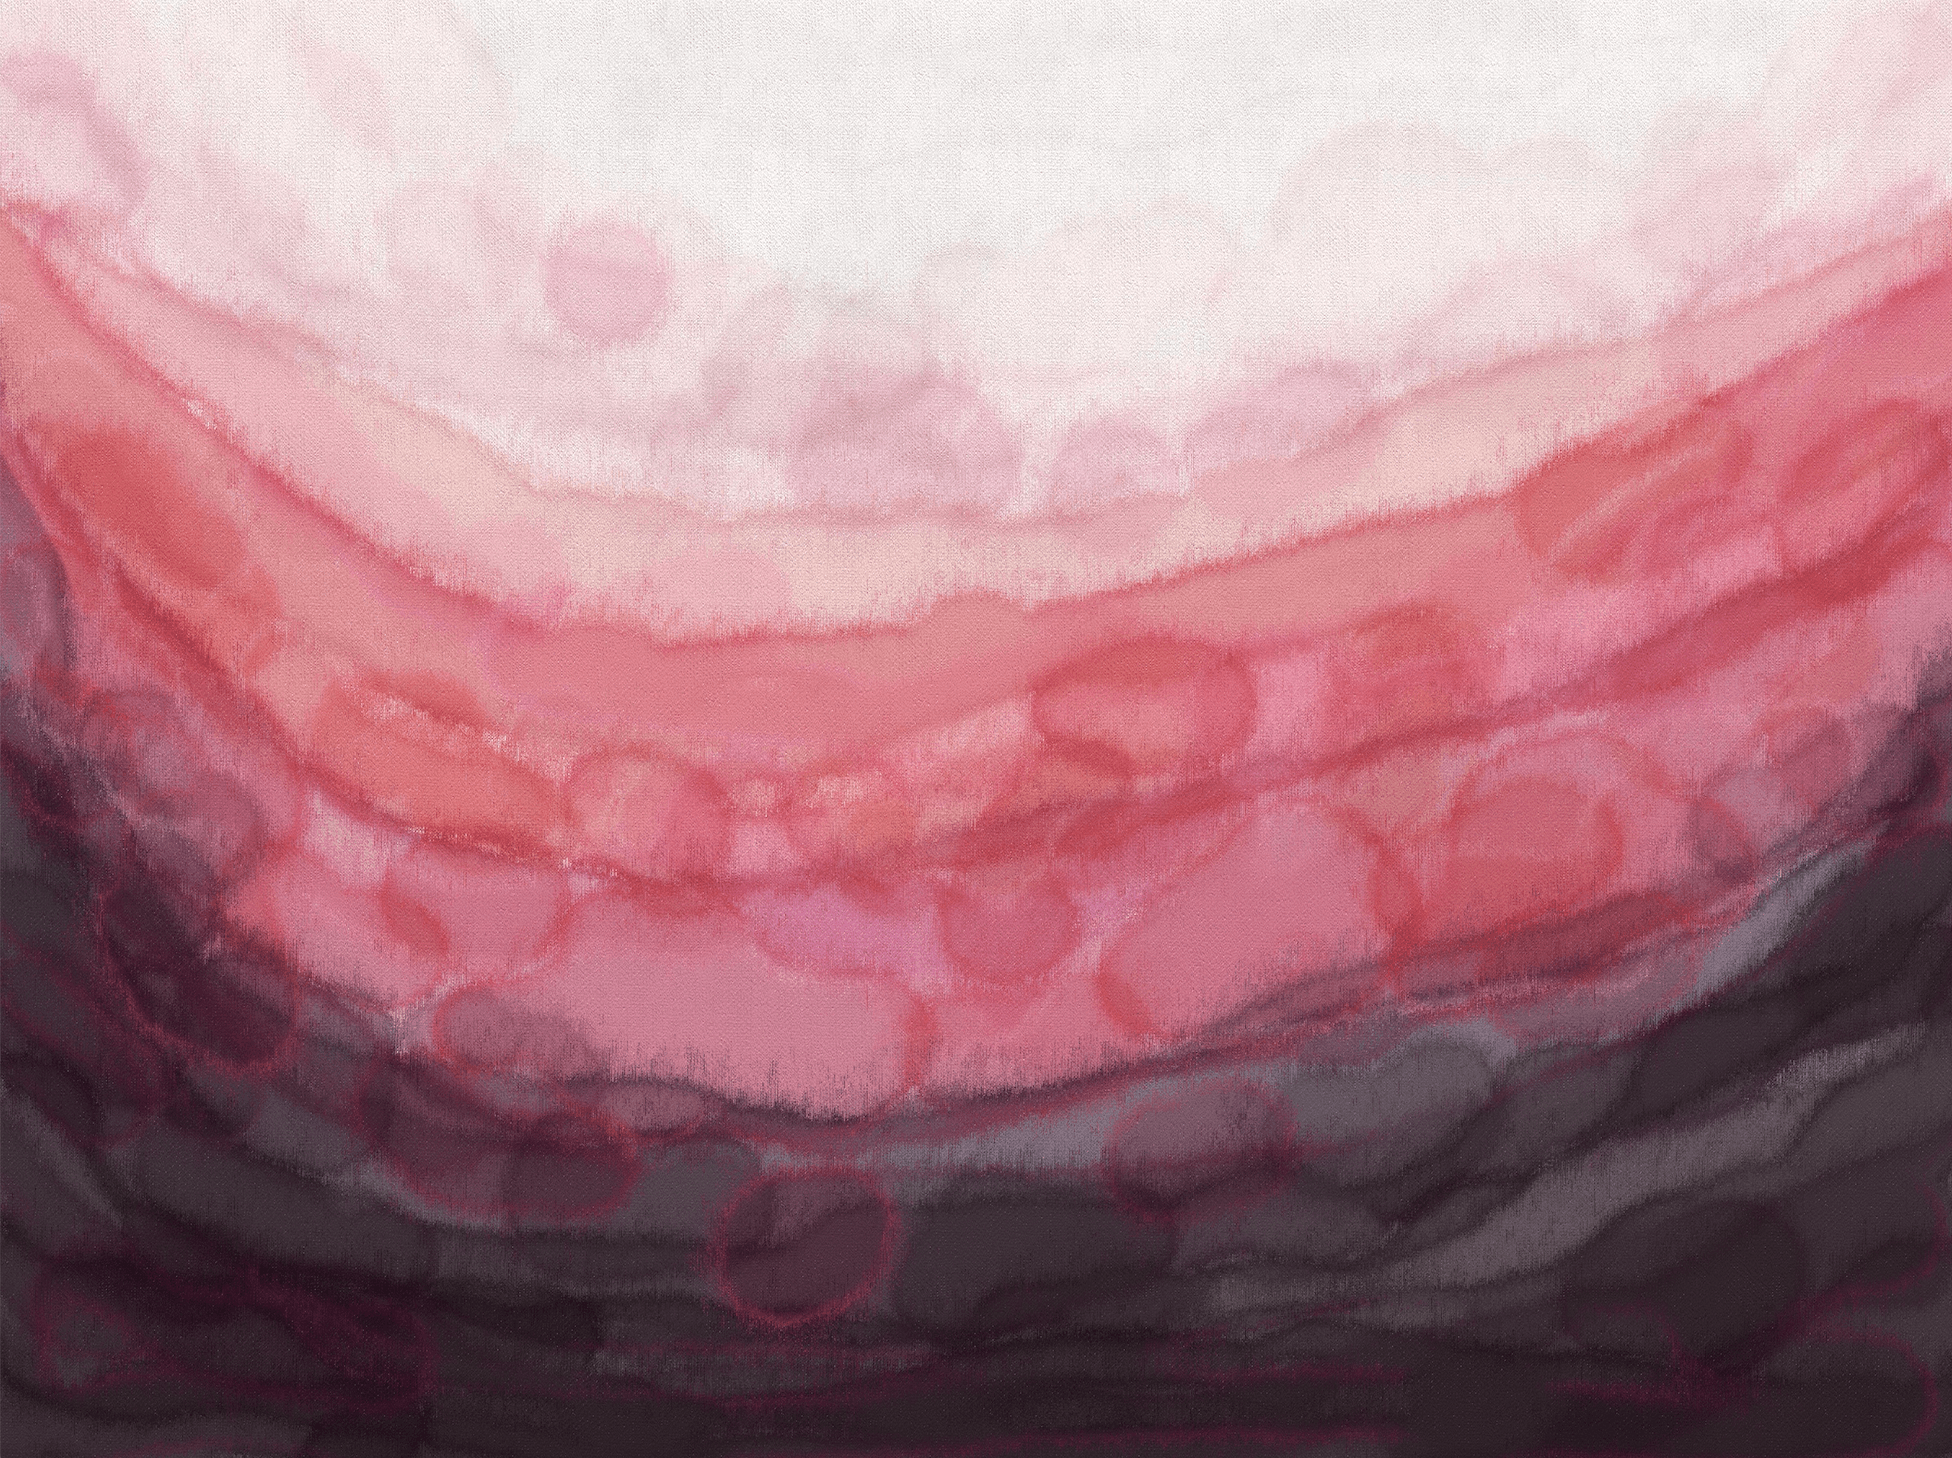 Serenity Pink Monochrome Ombre Watercolour Abstract Fluid Art Painting by Louise Mead - Dramatic, Soothing, Unique, Statement Art